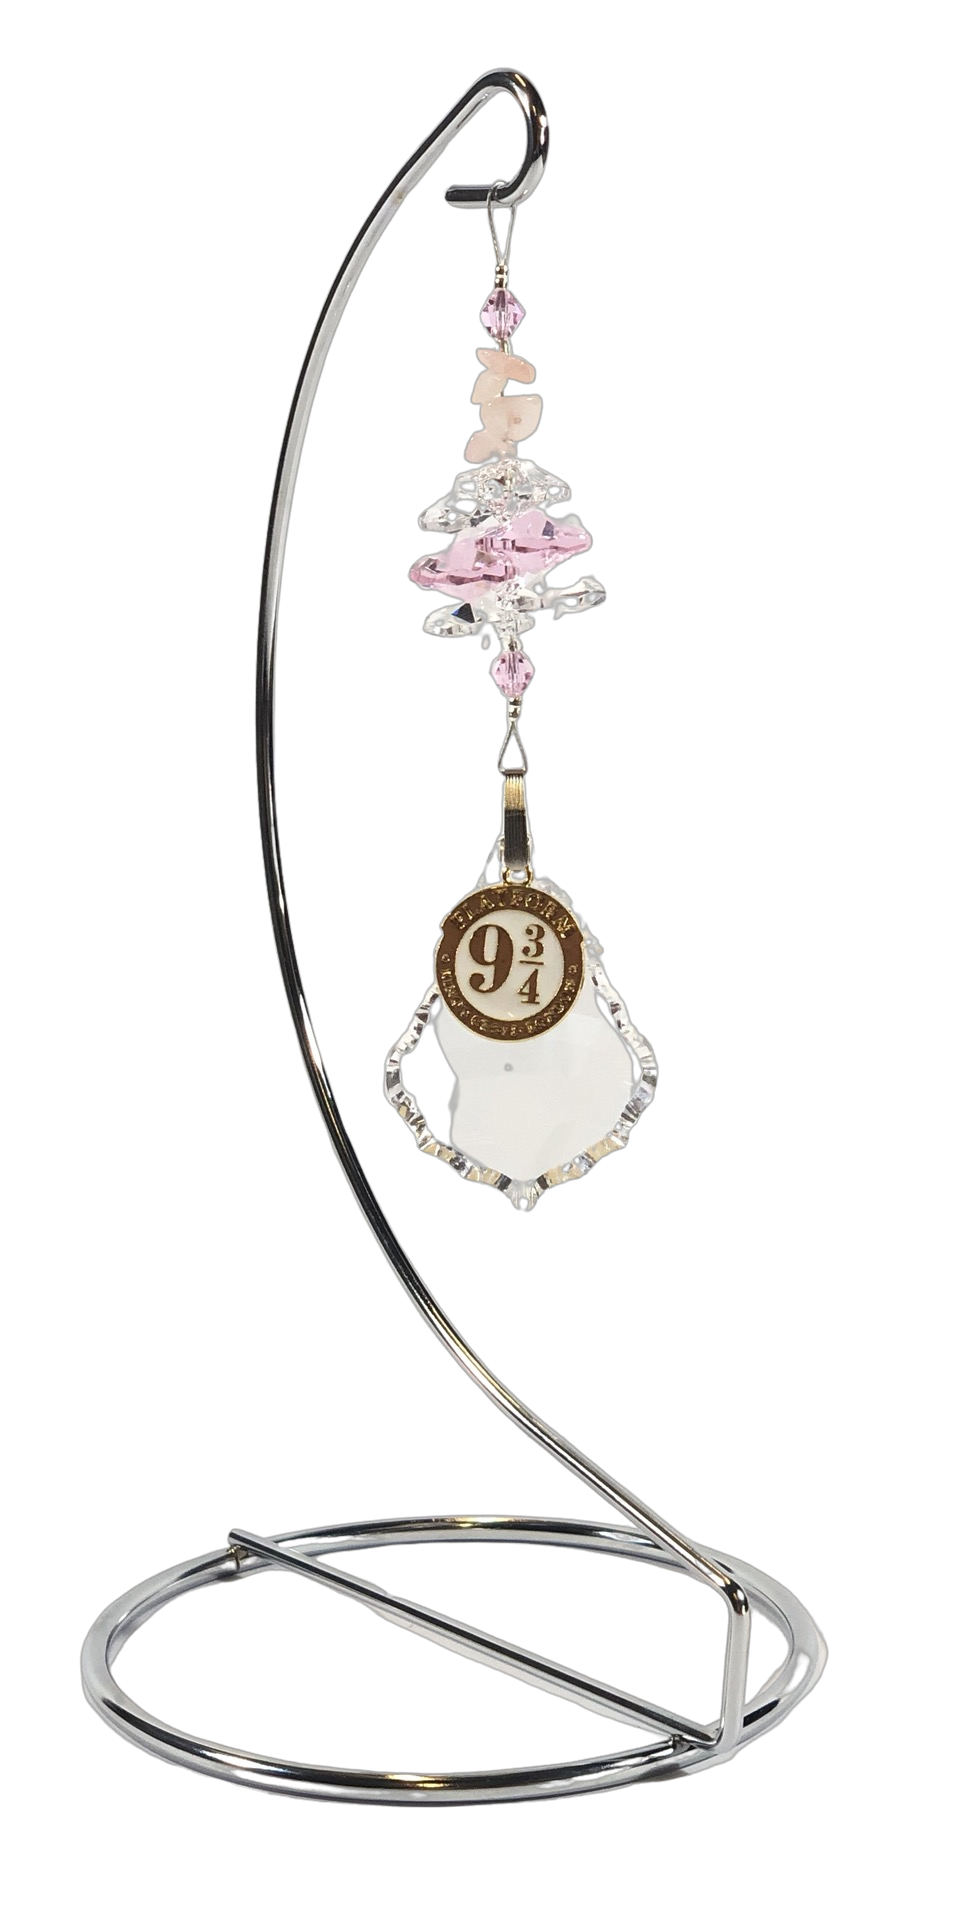 Harry Potter - Platform 9 3/4 crystal suncatcher is decorated with rose quartz gemstones and come on this amazing stand.